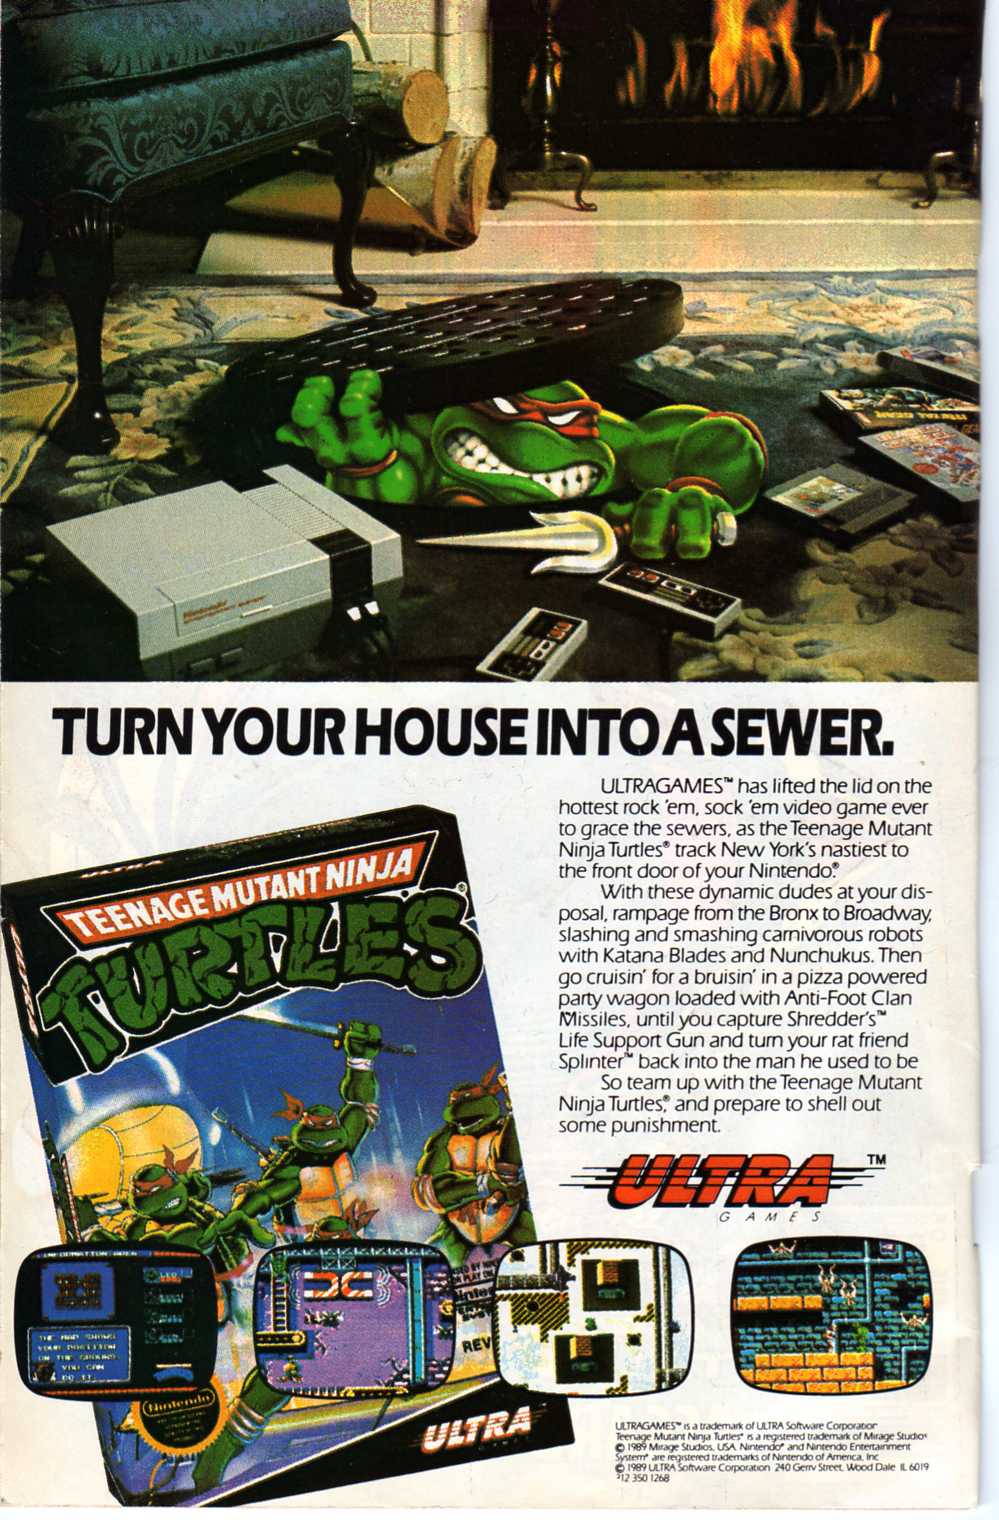 Video Game Ads Part 2